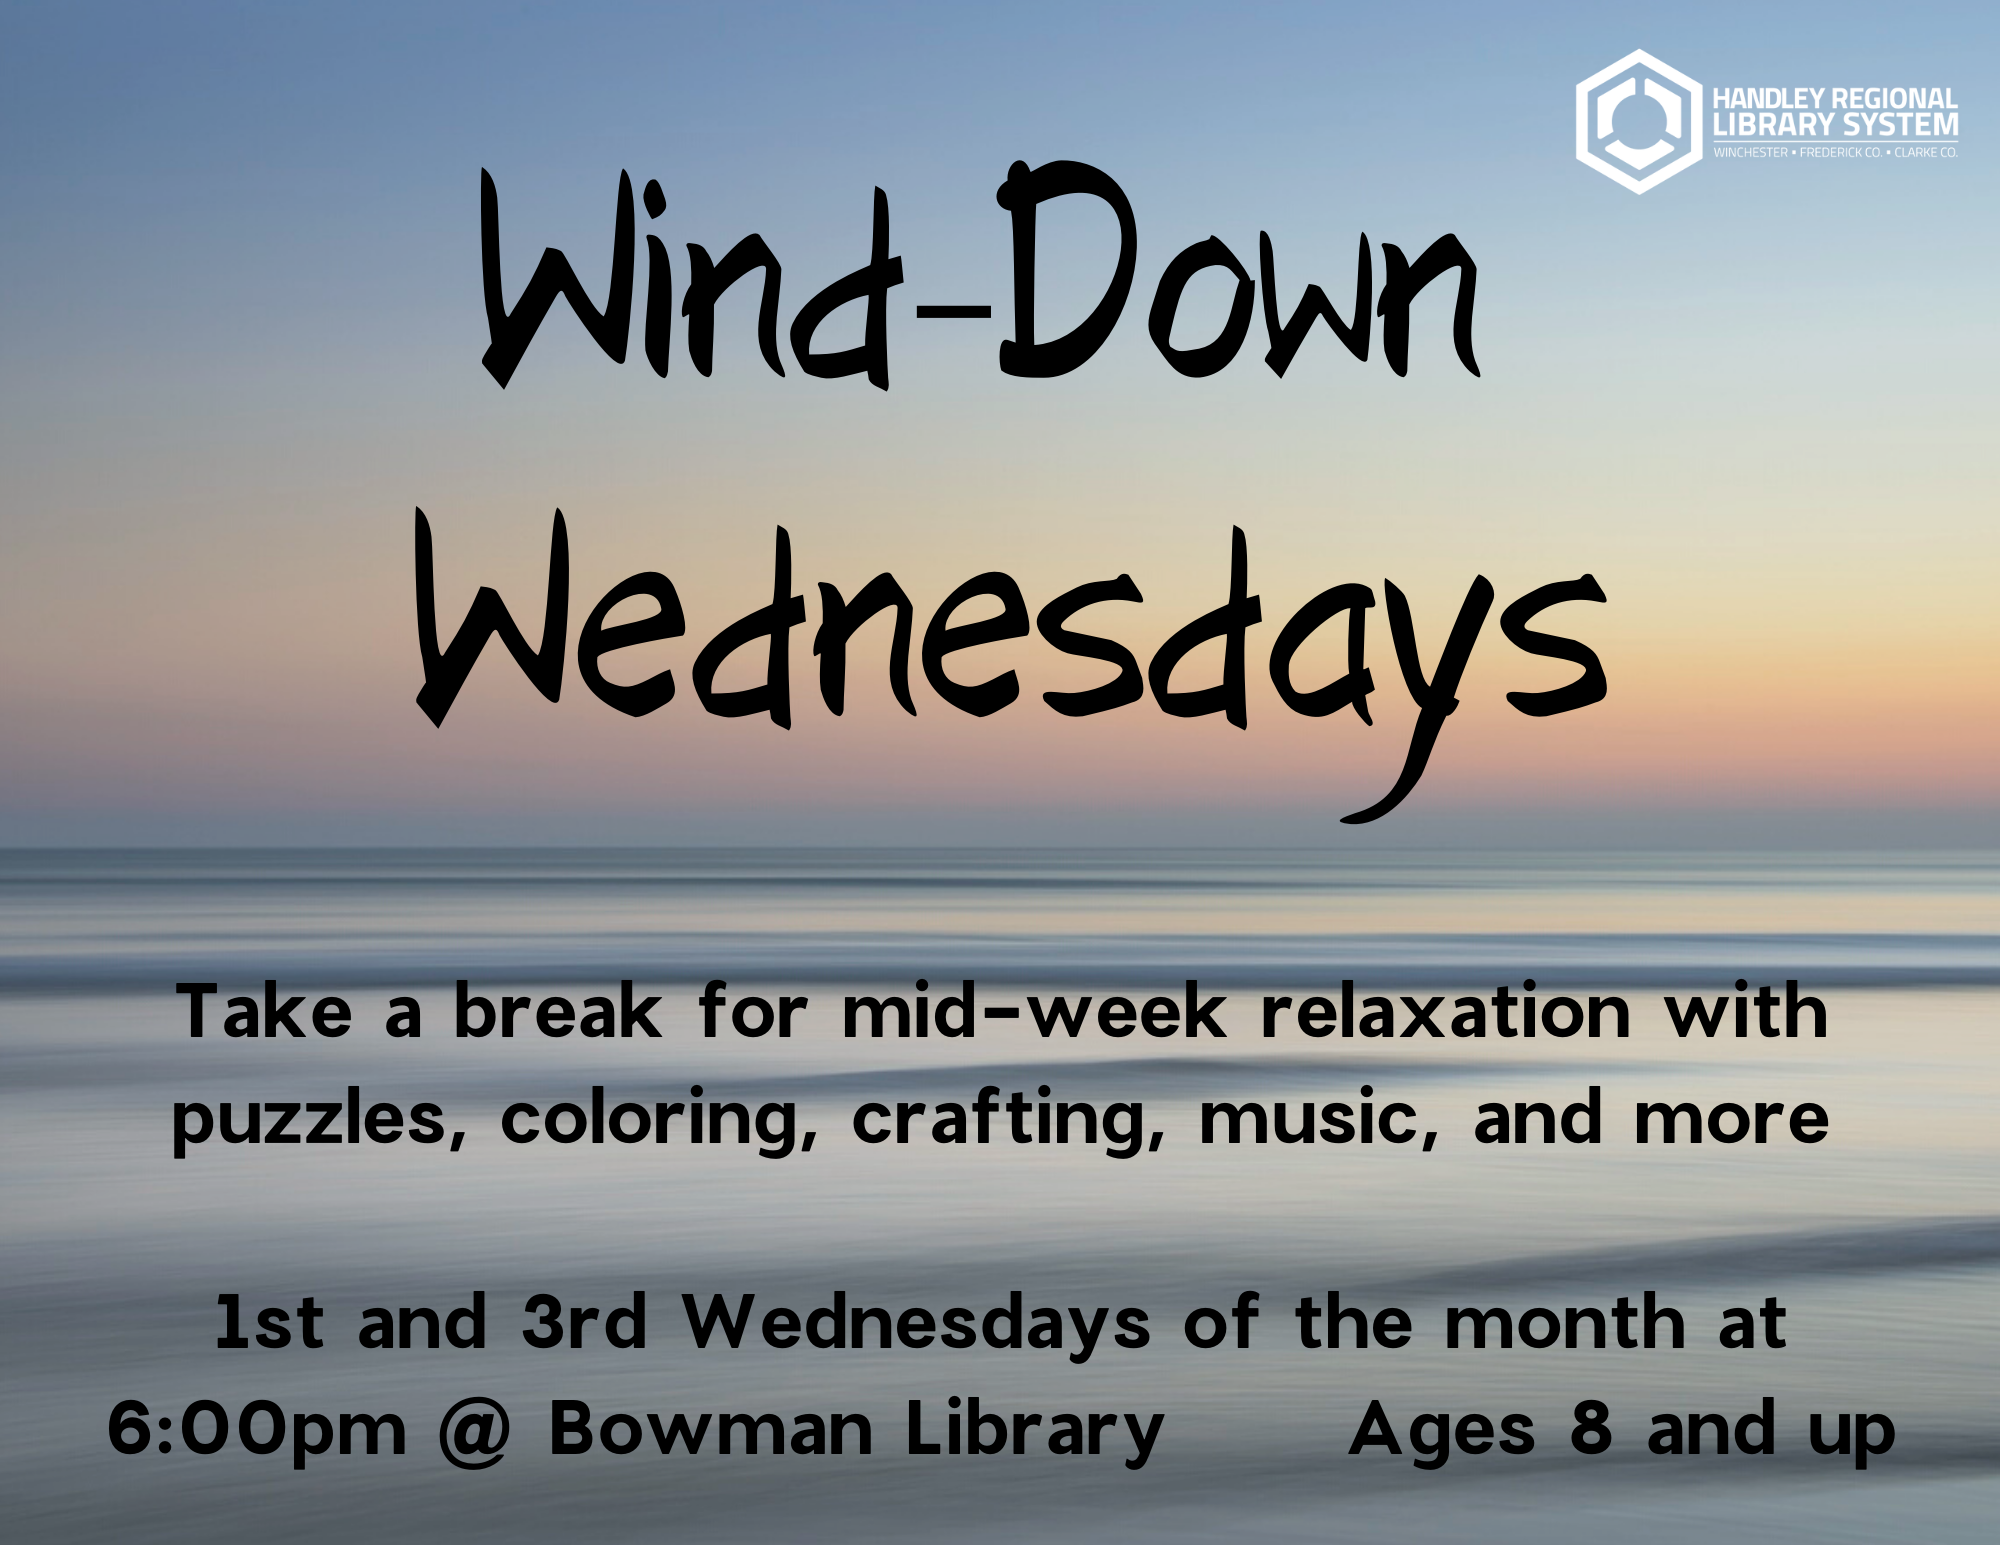 Wind-Down Wednesdays at Bowman